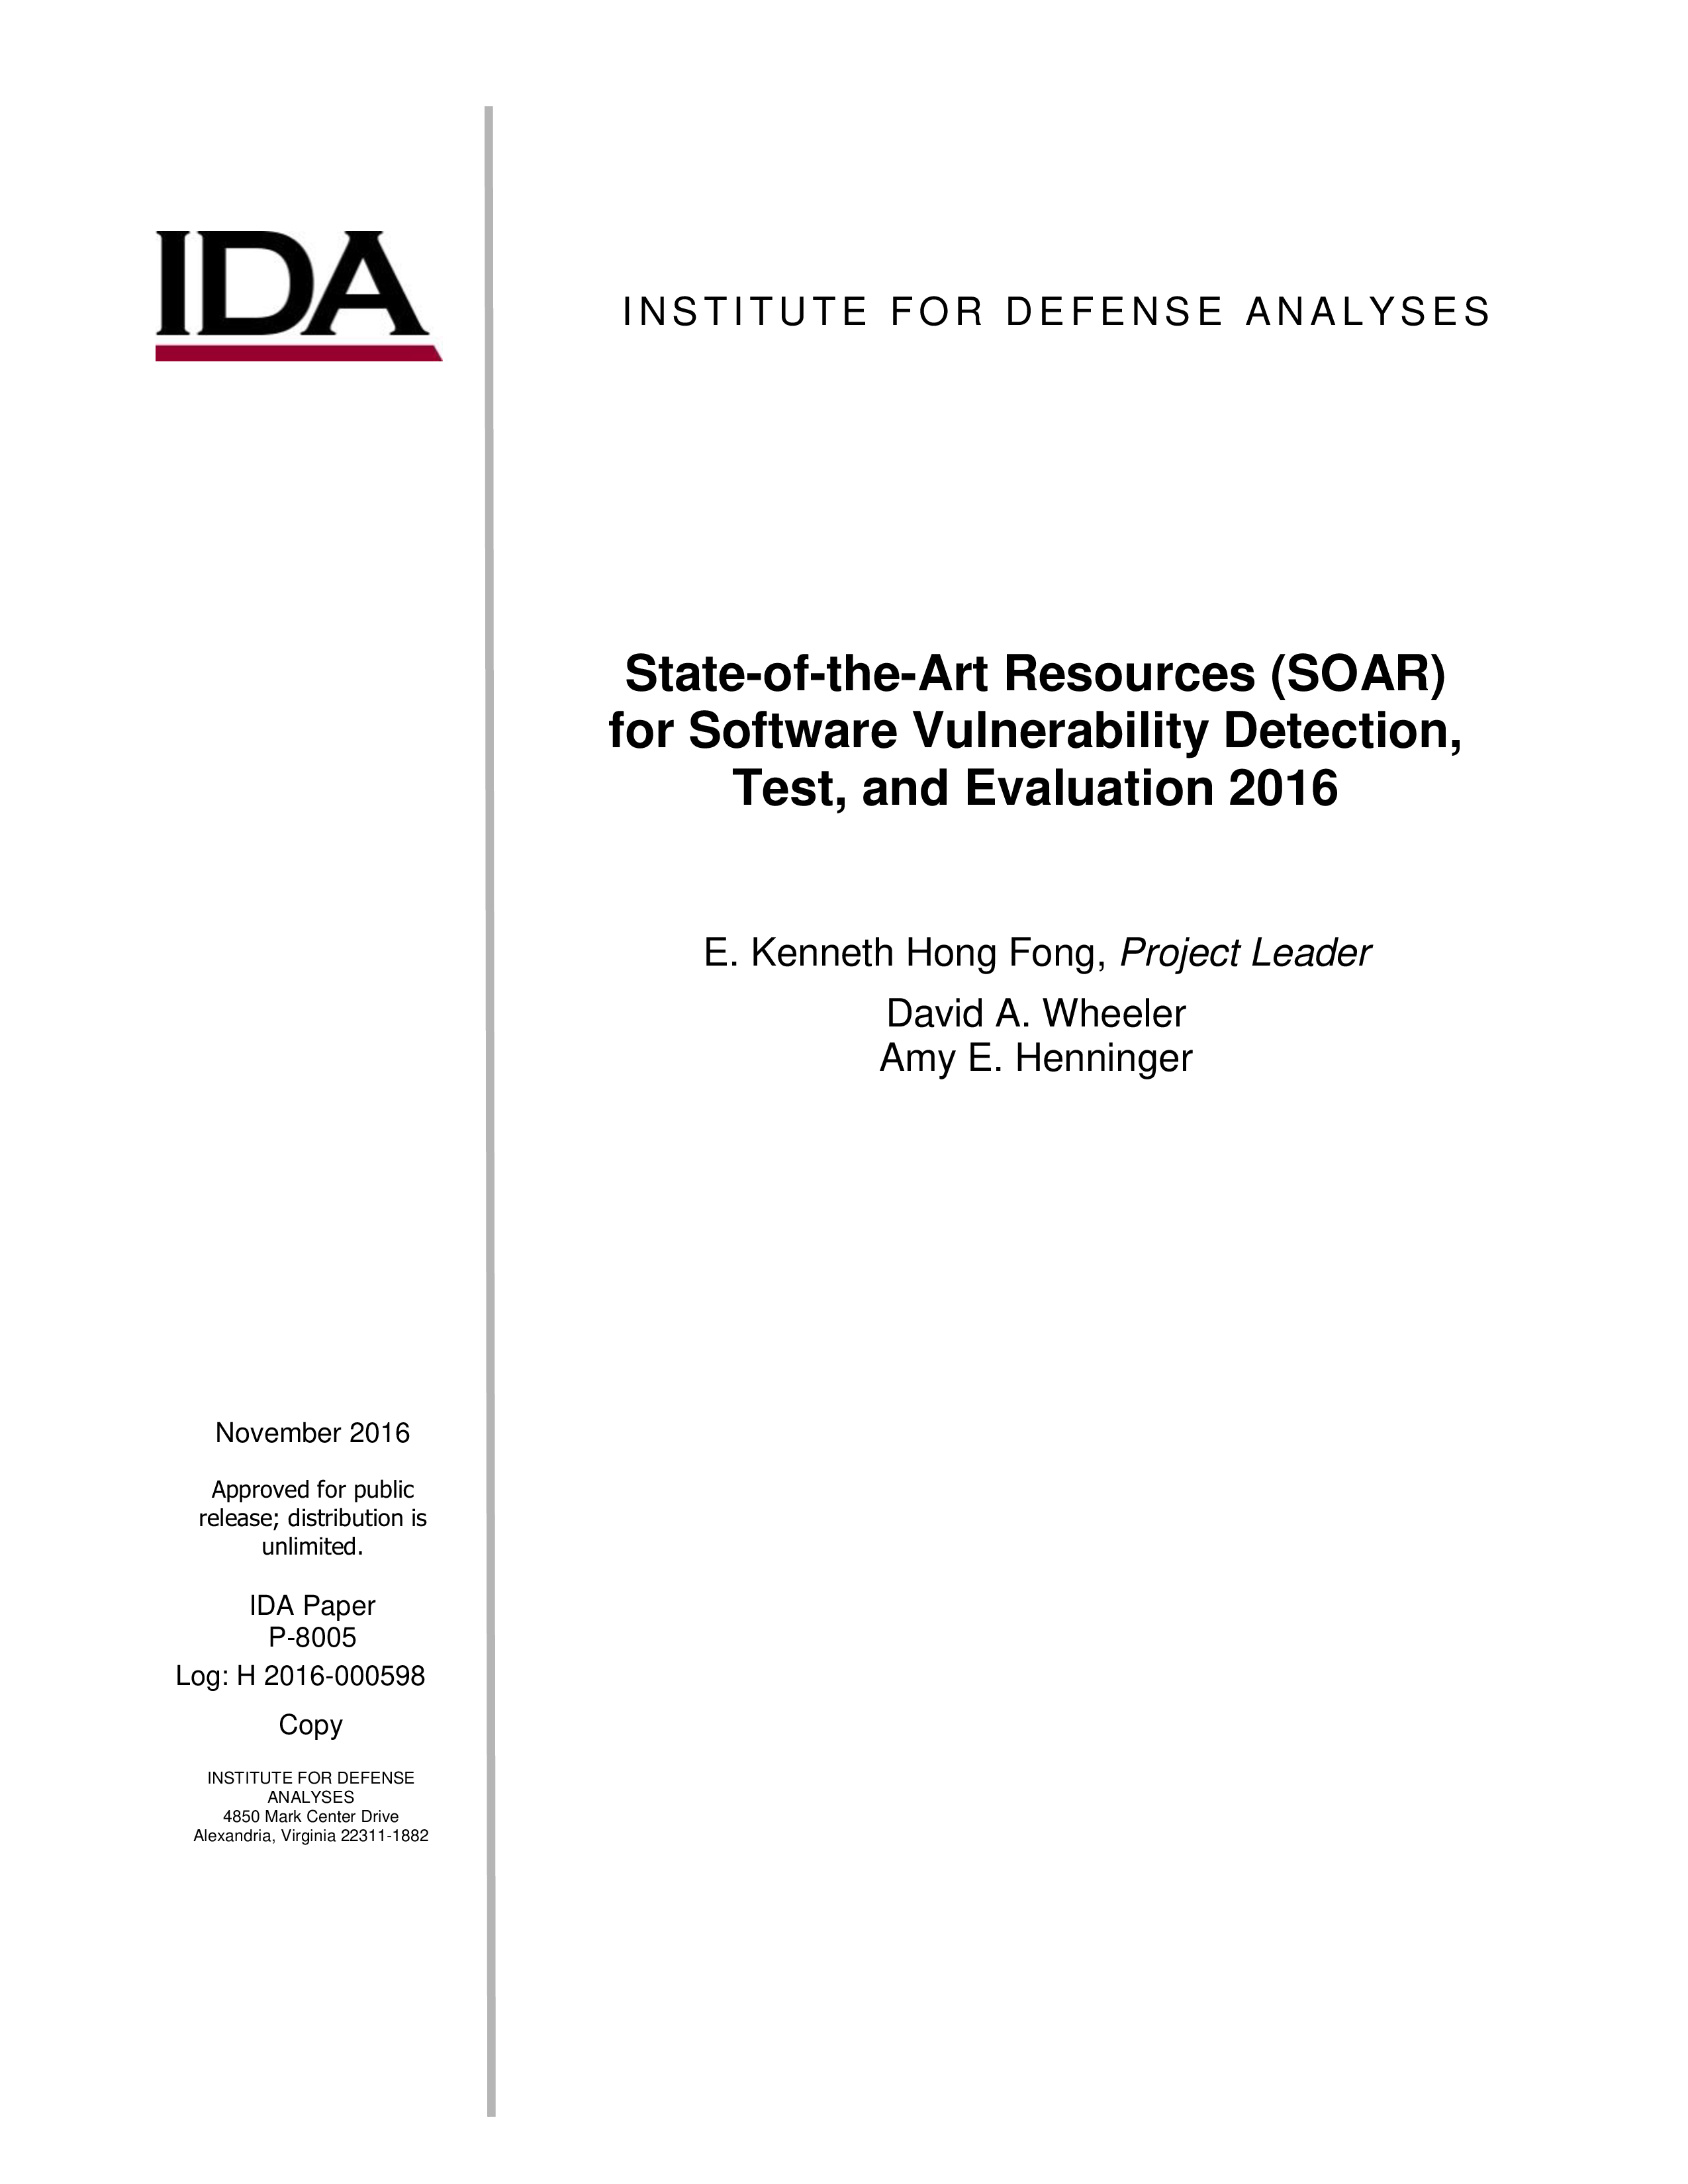 State-of-the-Art Resources (SOAR) for Software Vulnerability Detection, Test, and Evaluation 2016